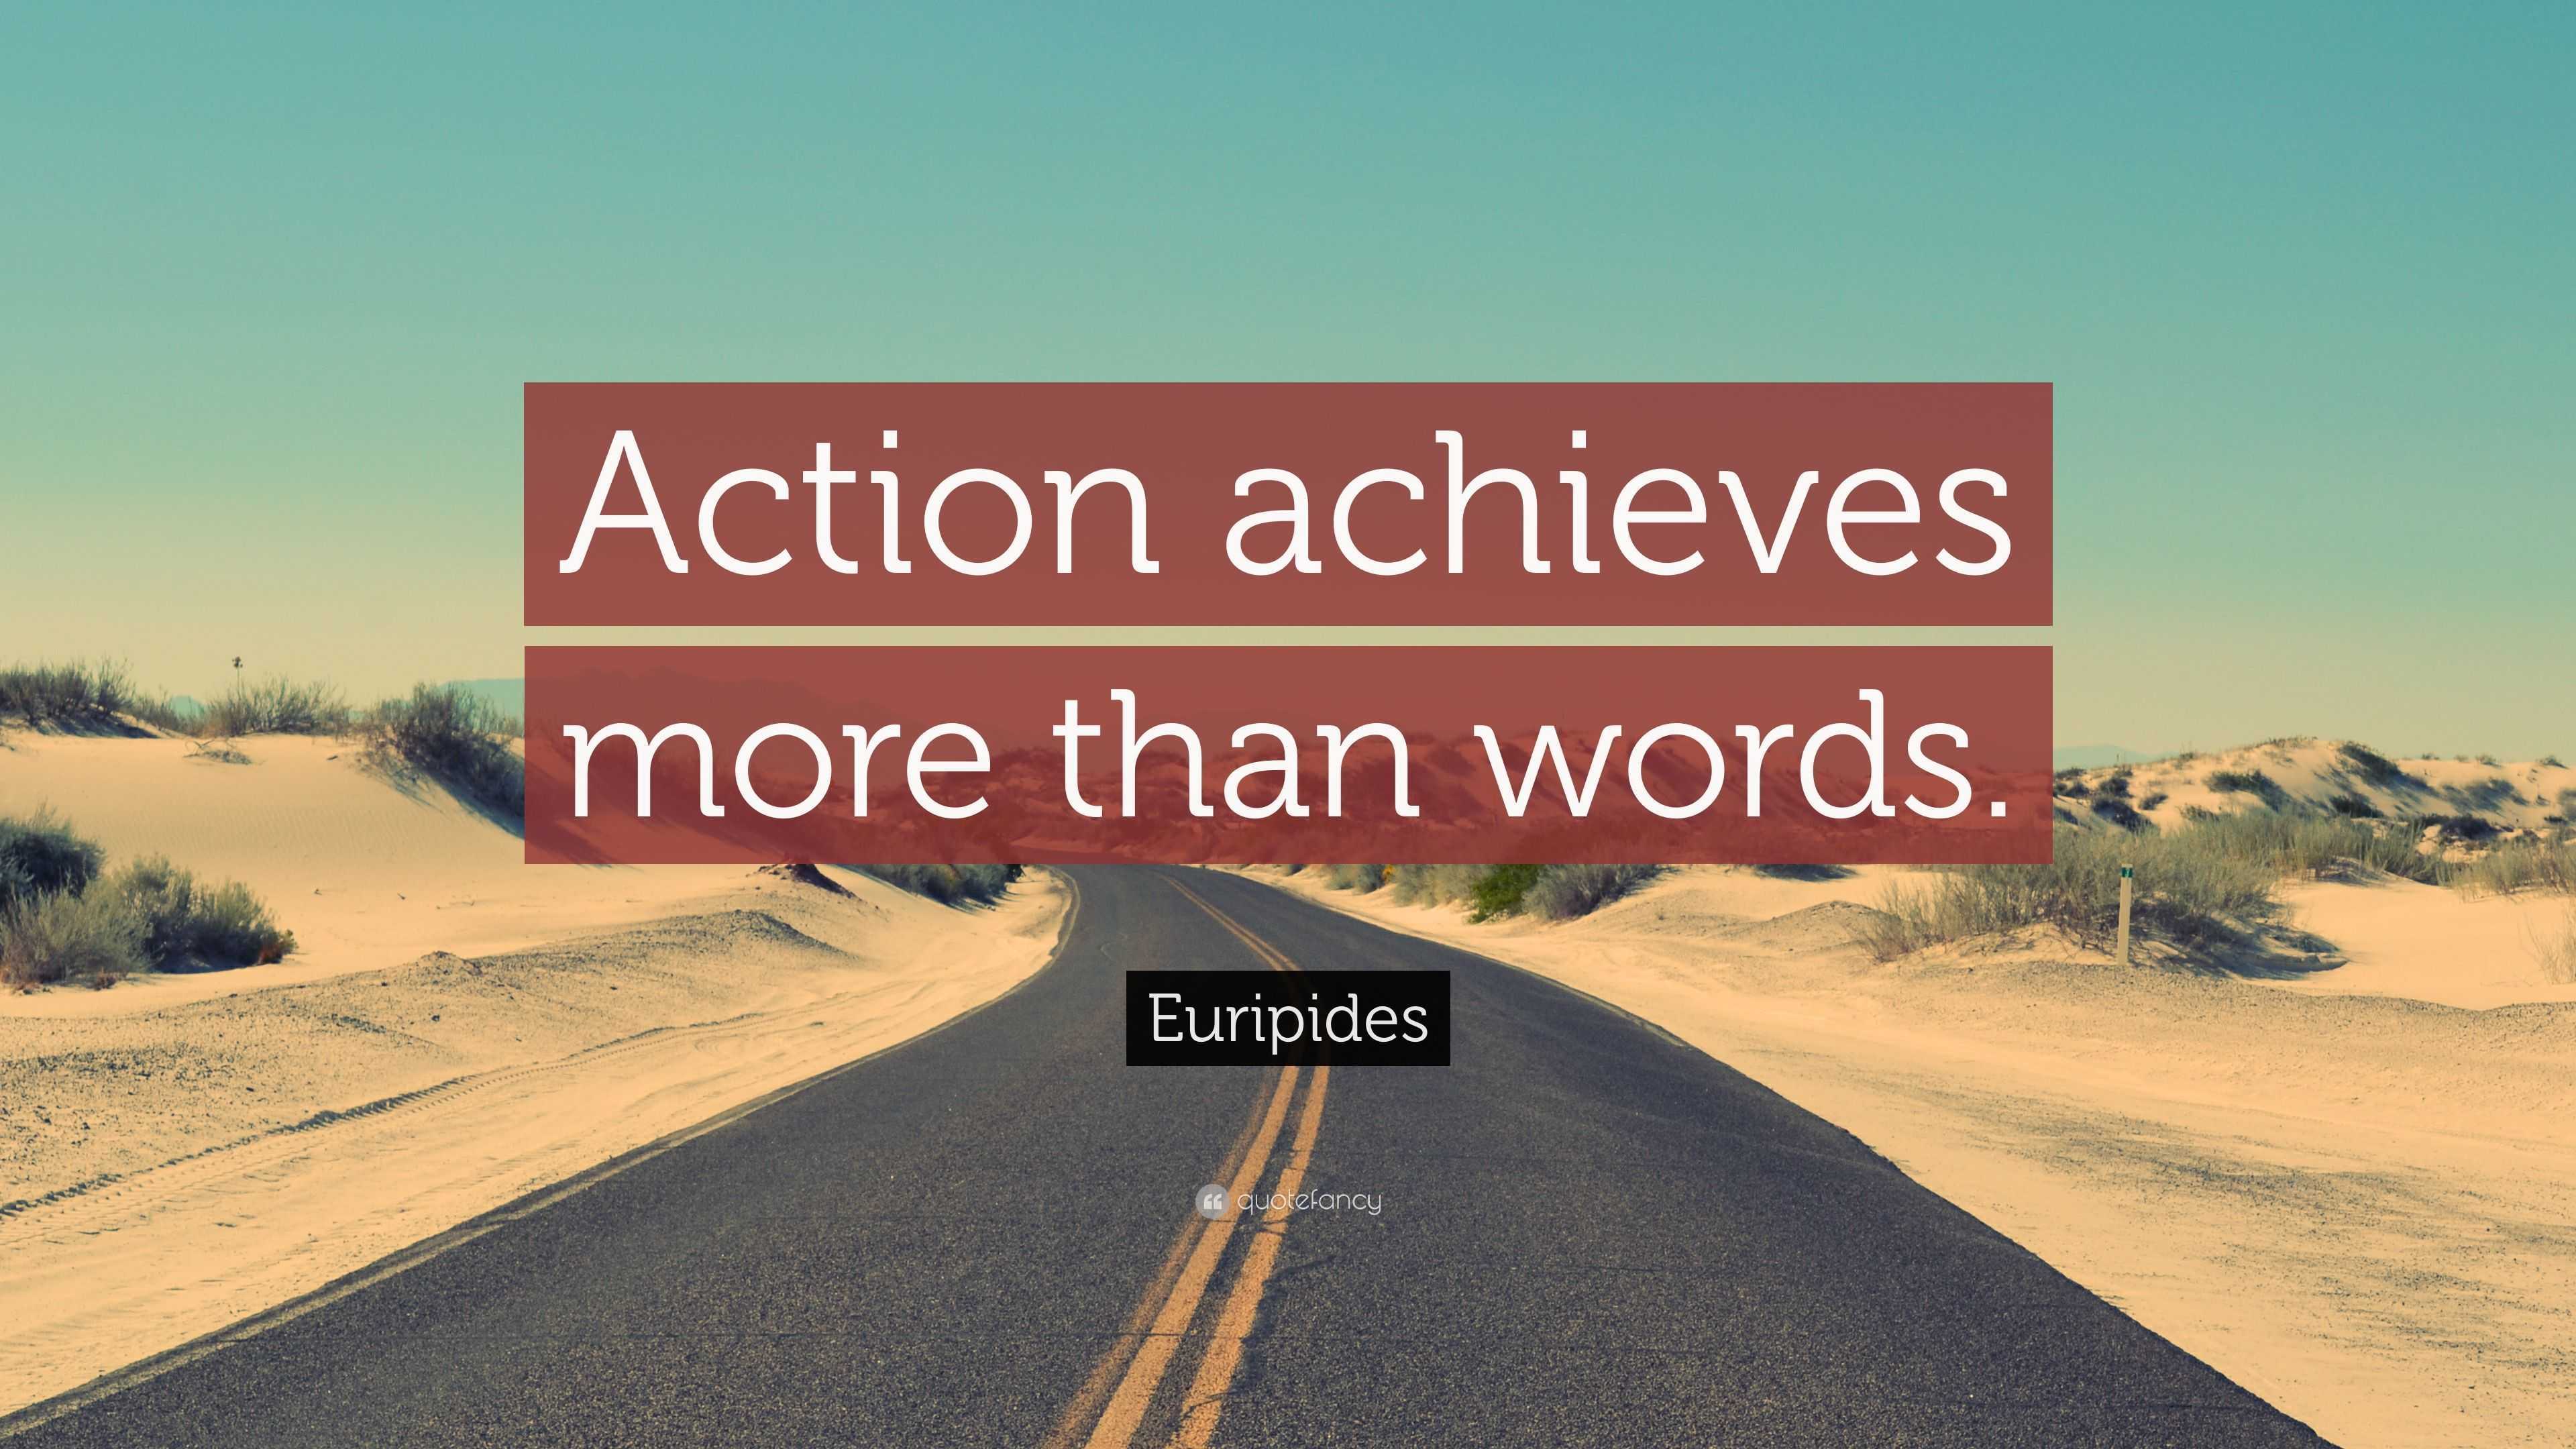 quotes about actions and words